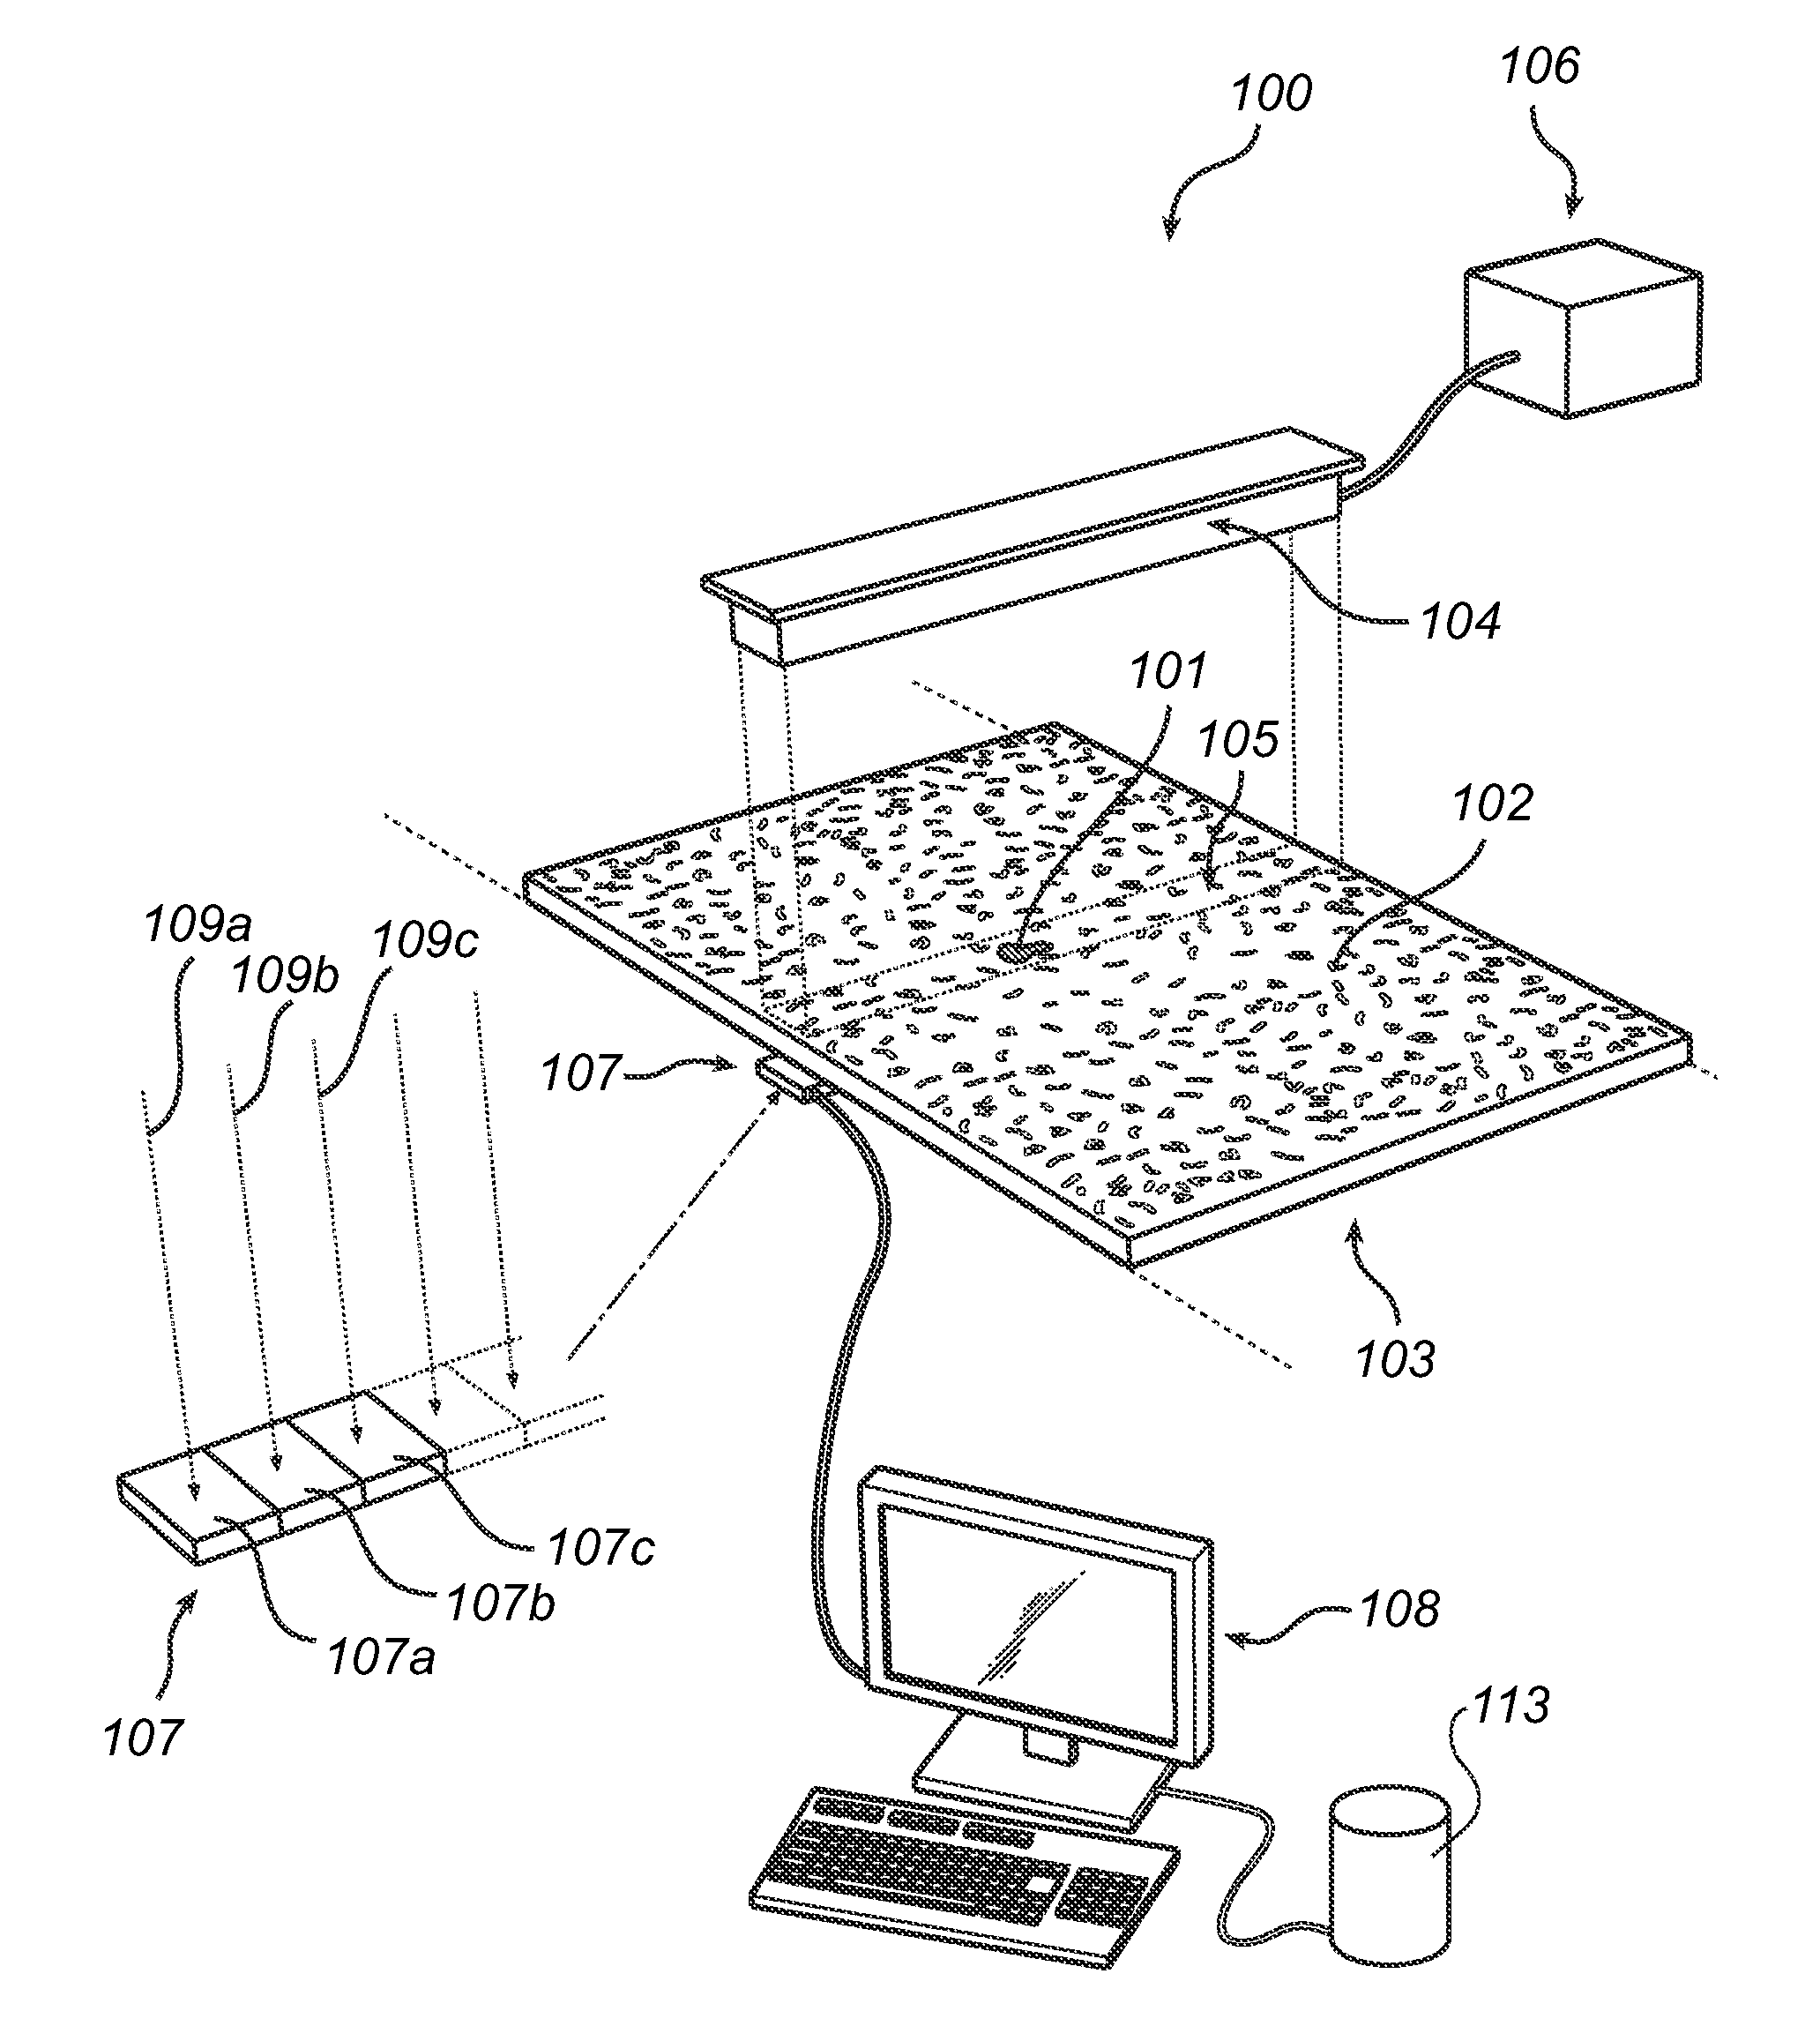 Method and apparatus for estimating the ash content of a biological material